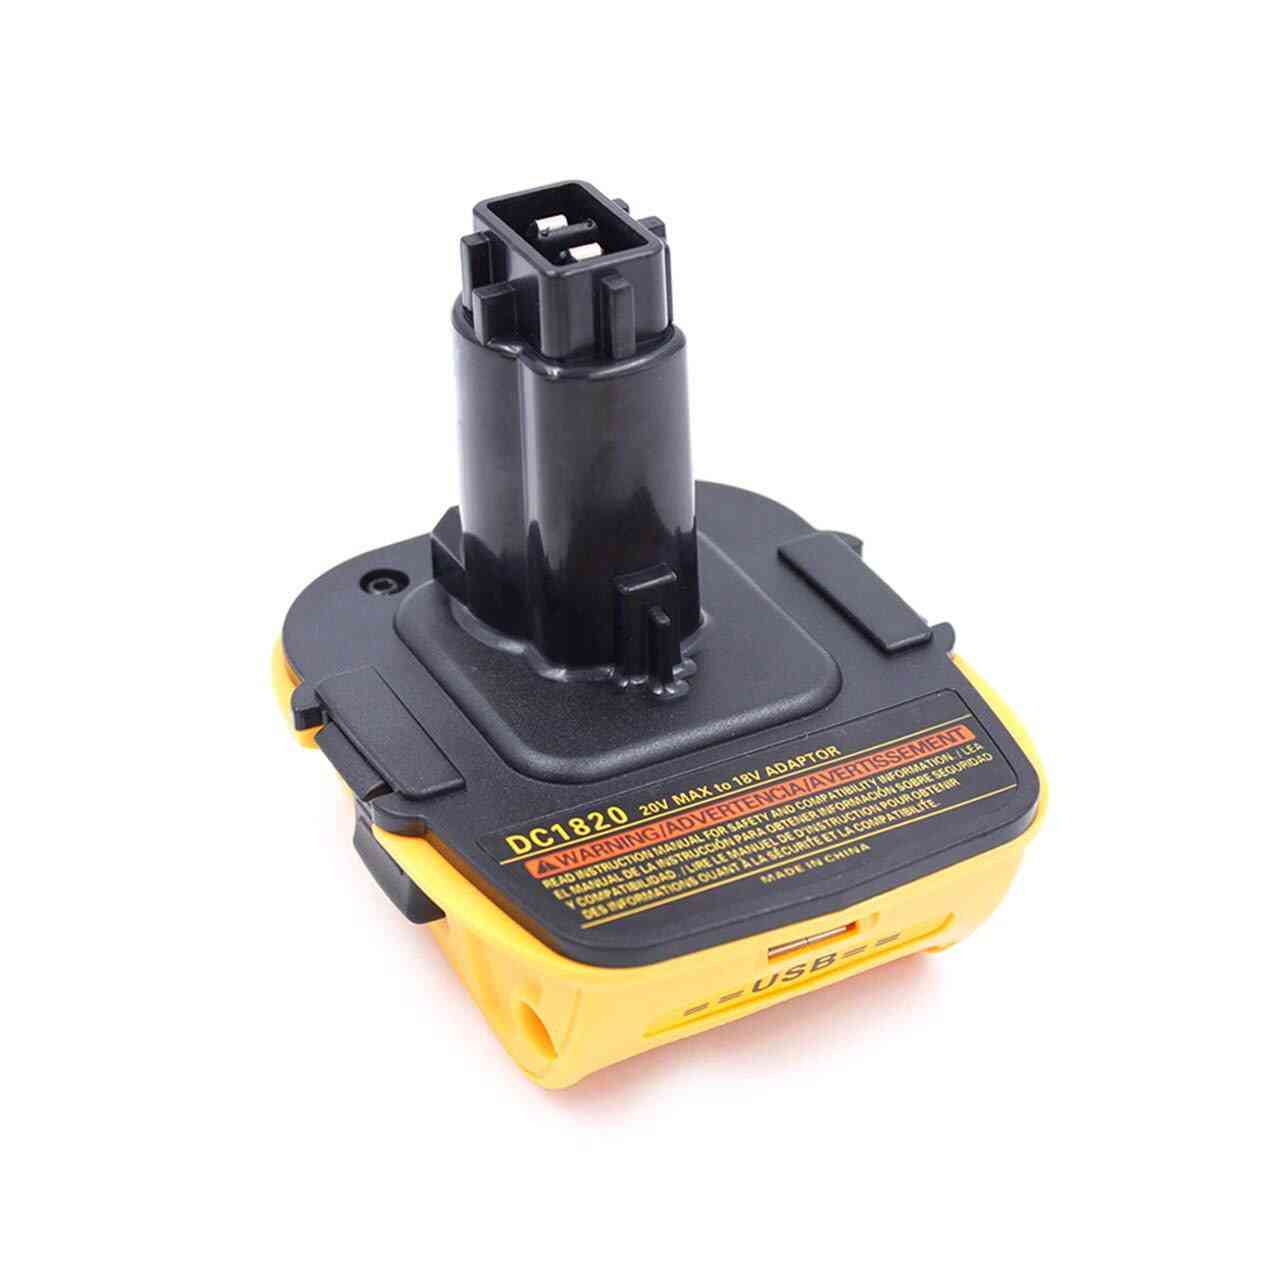 Lithium Battery Battery Adapter